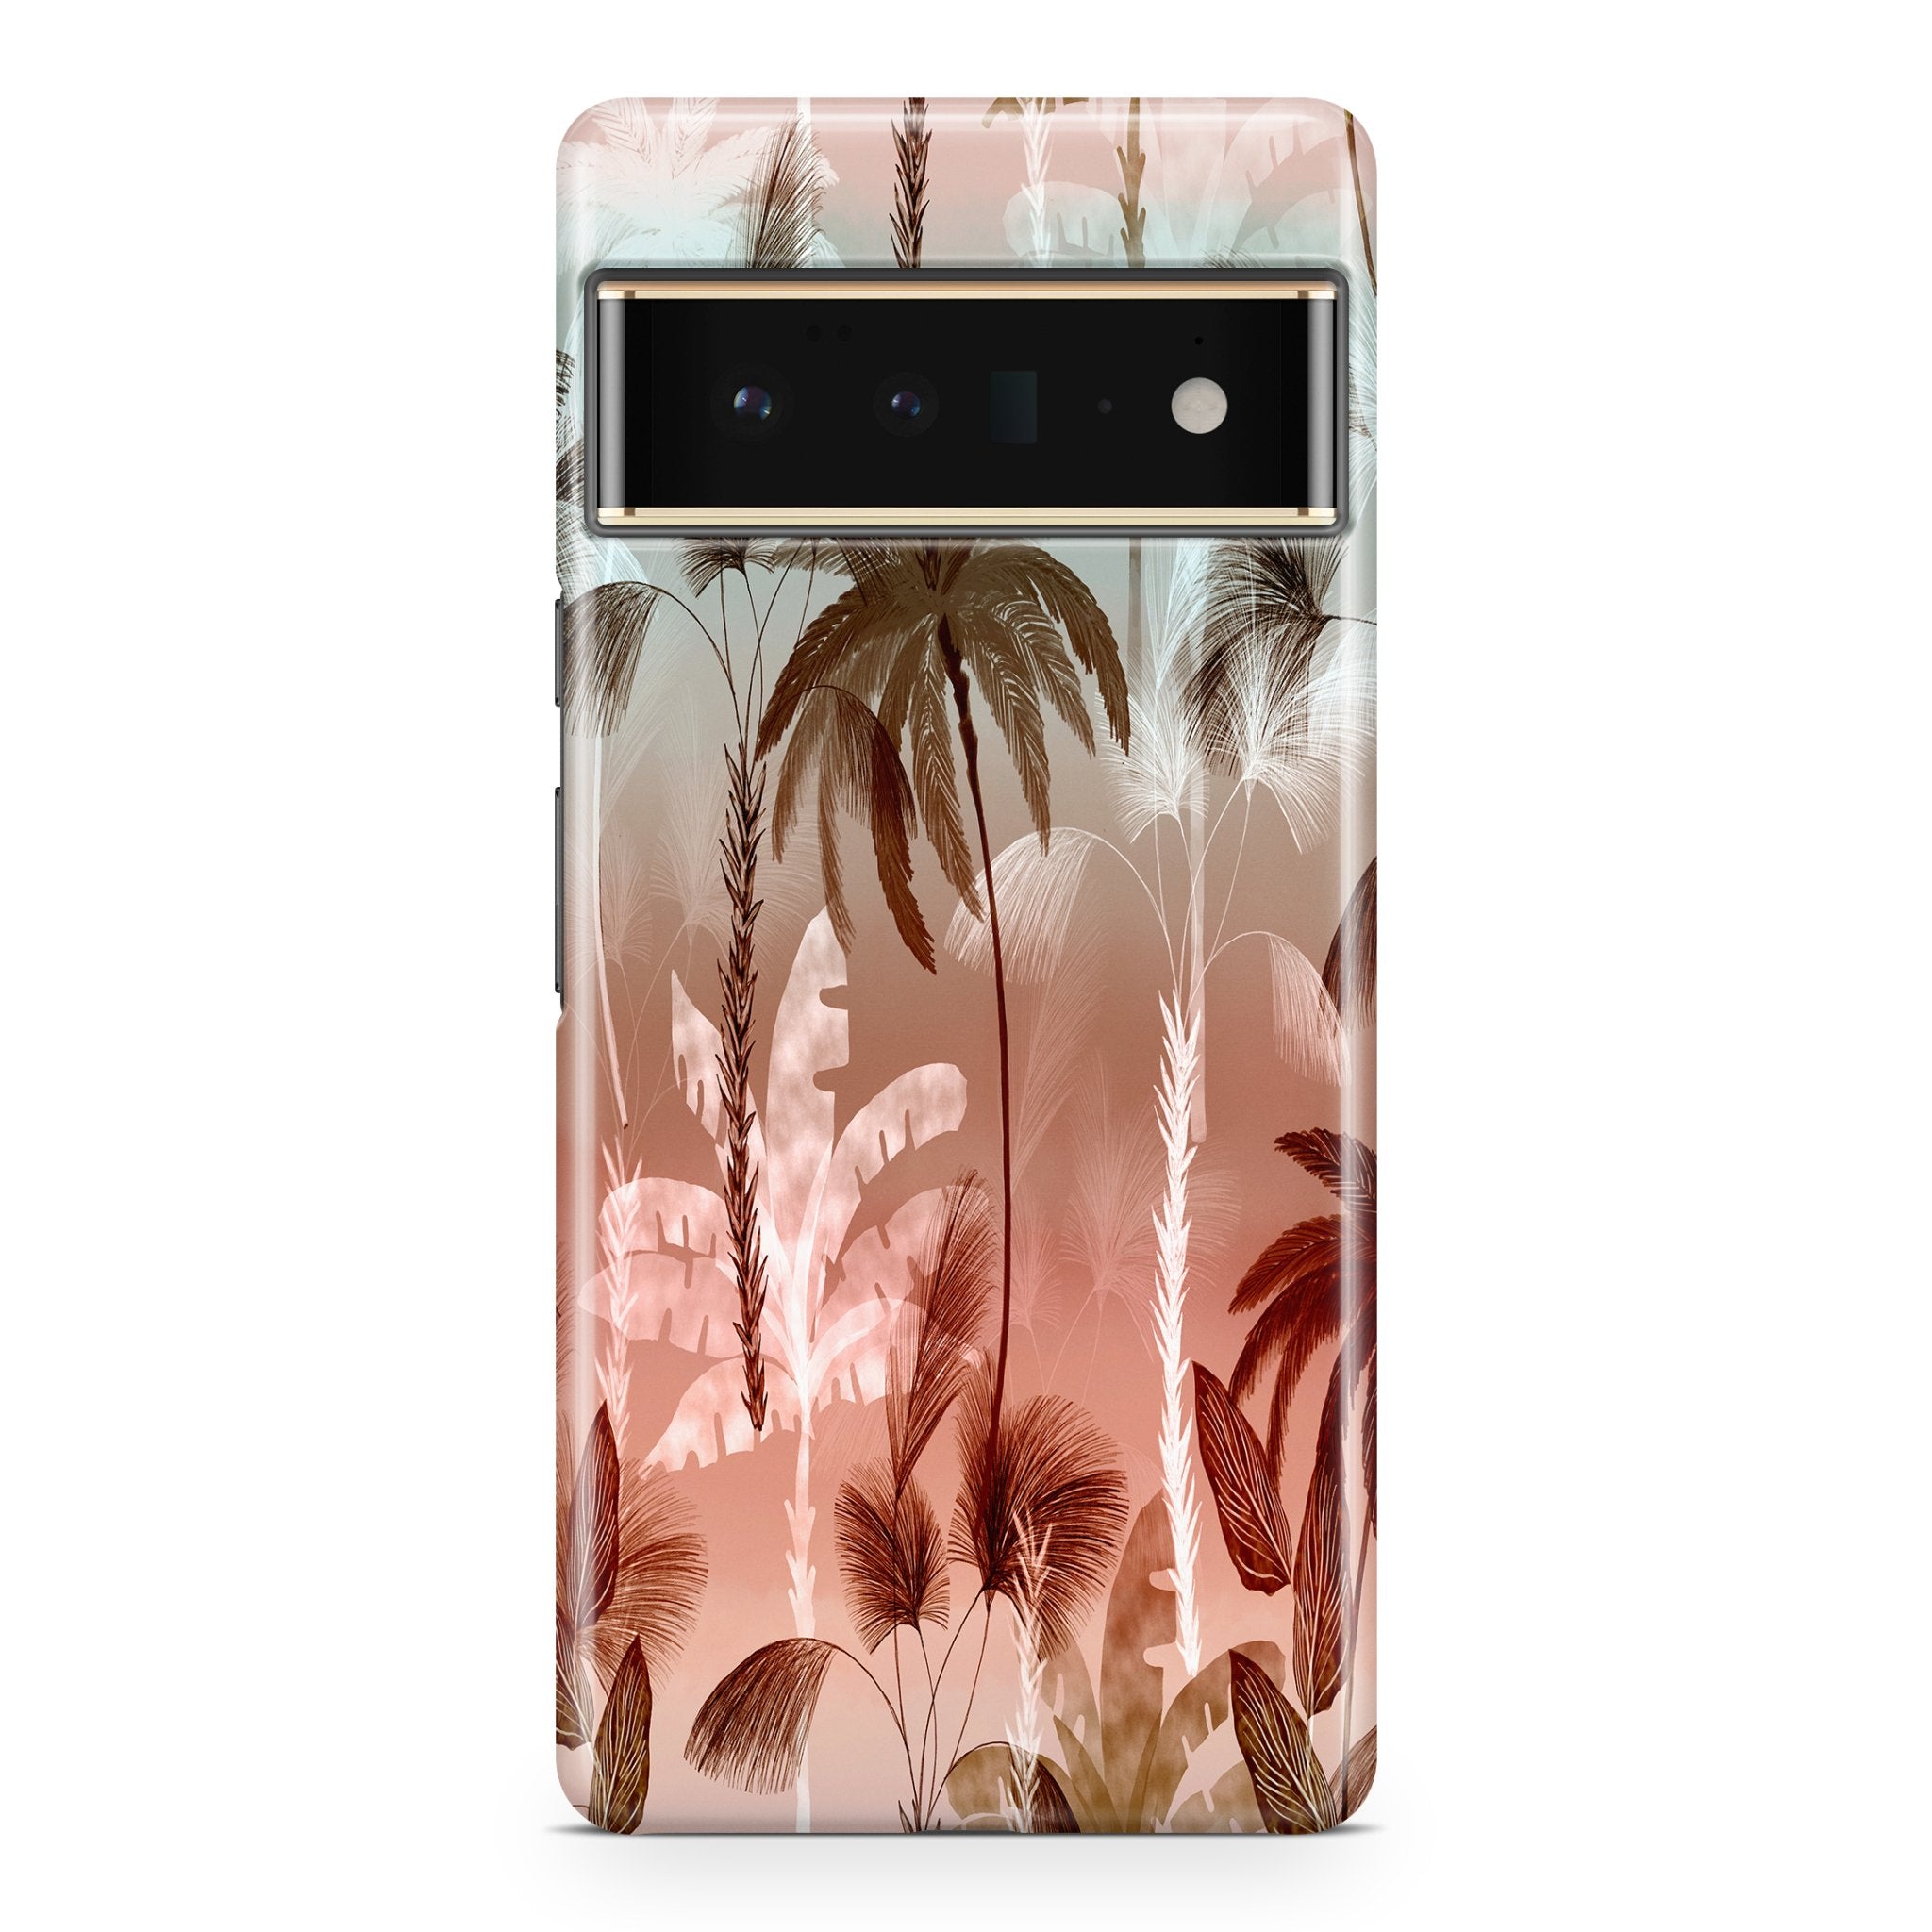 Sunset Tropical - Google phone case designs by CaseSwagger